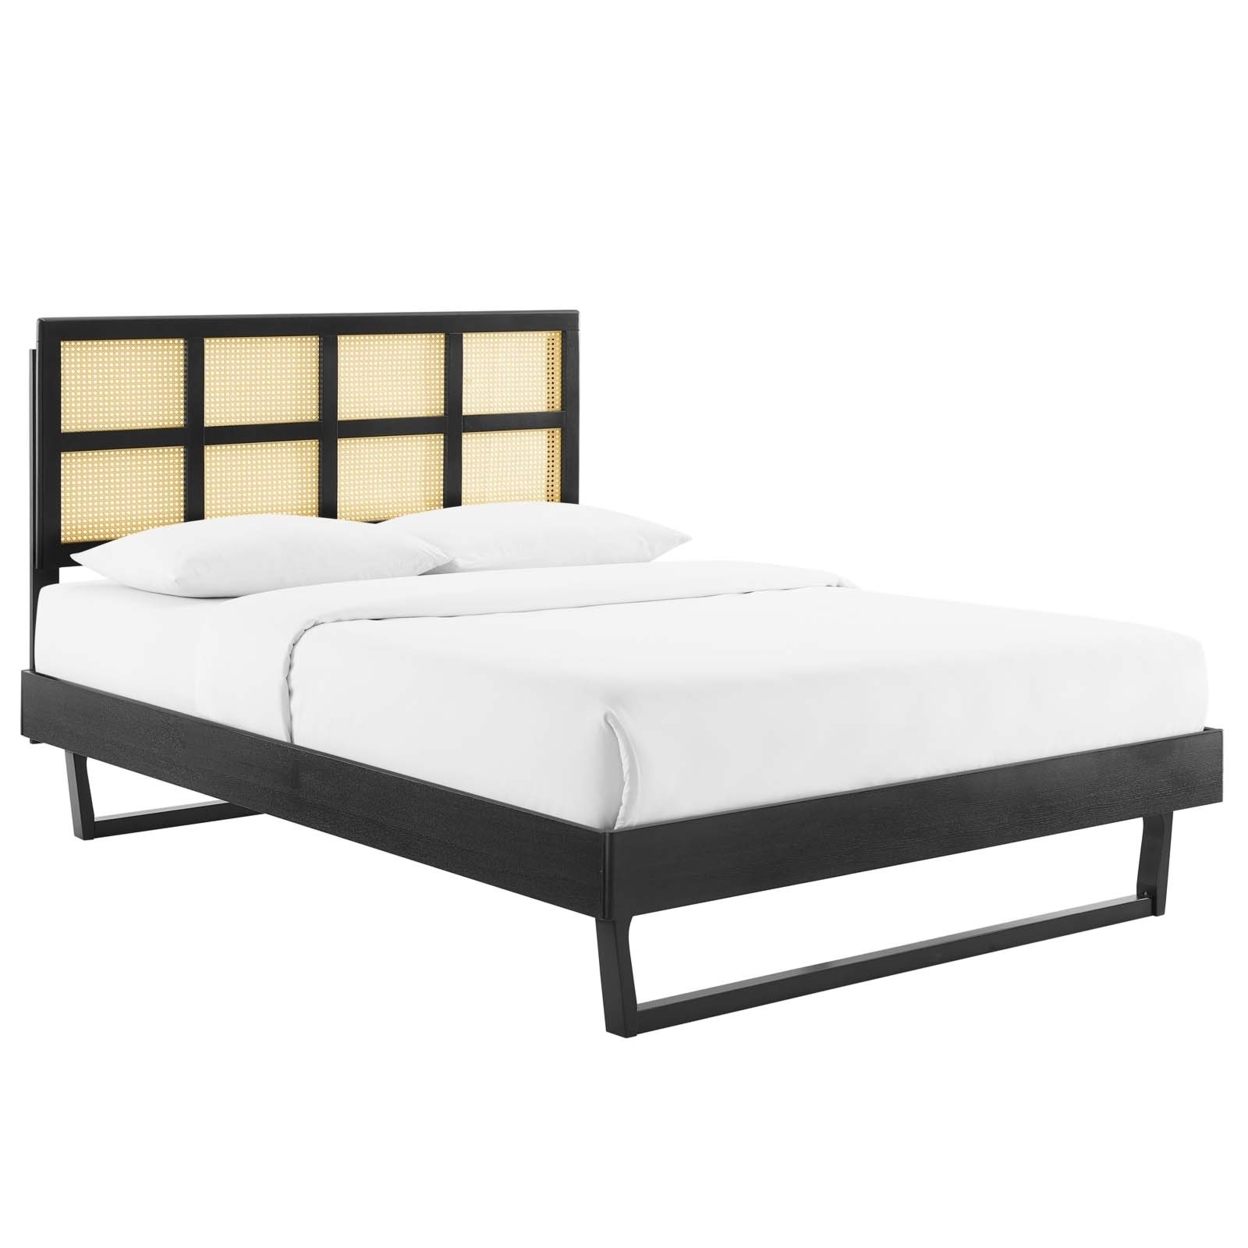 Sidney Cane And Wood King Platform Bed With Angular Legs, Black